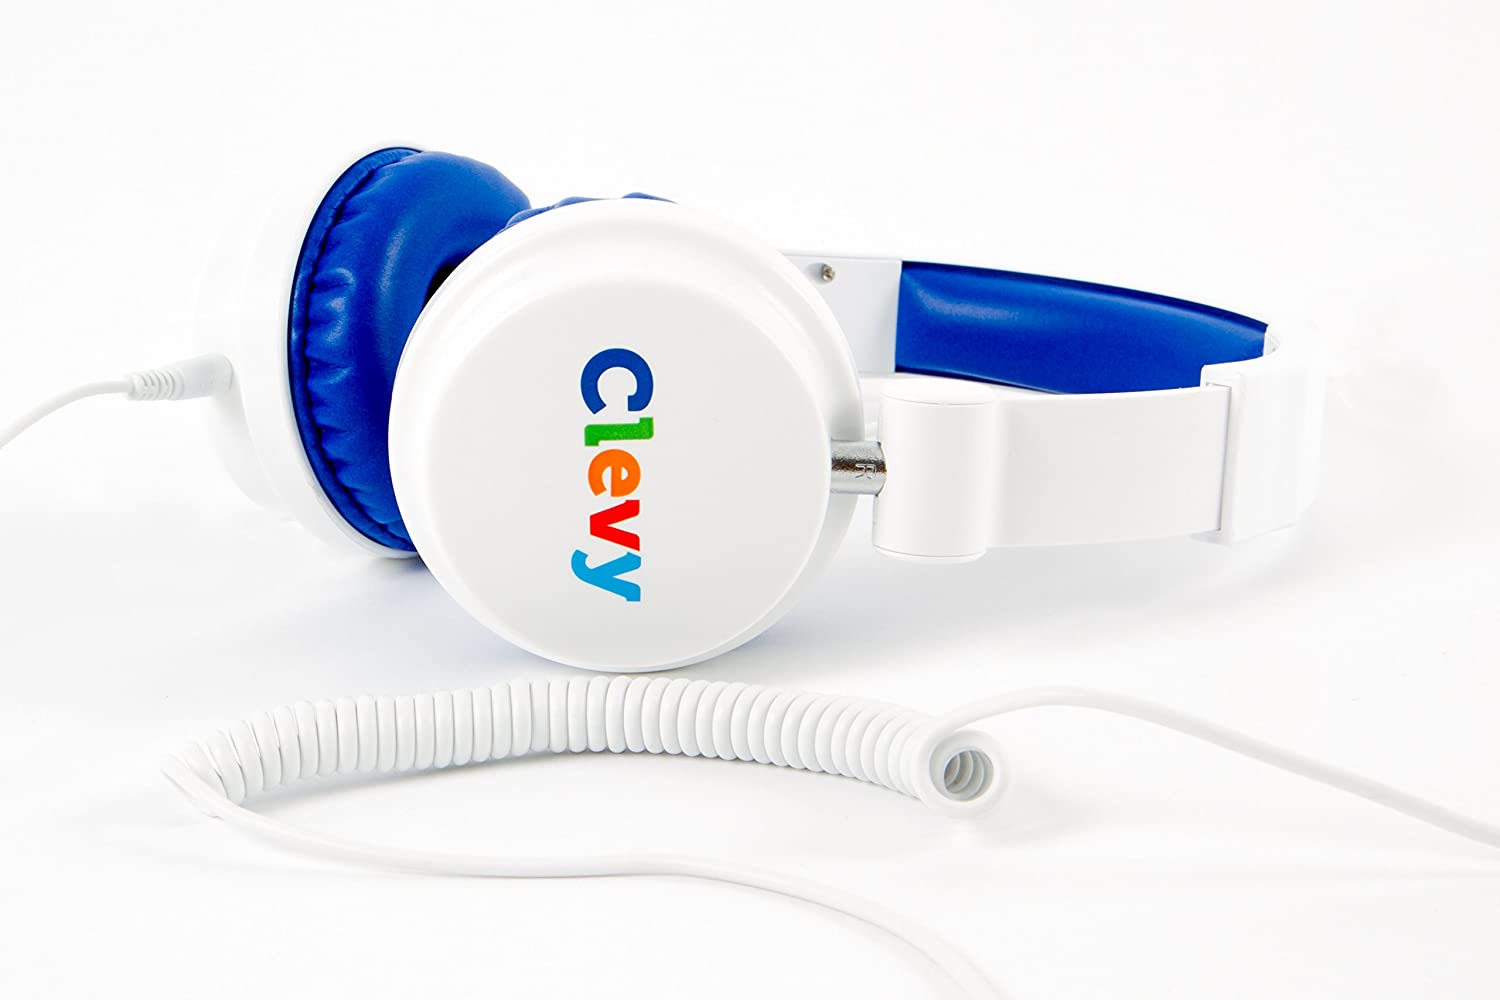 Clevy Hearsafe Headphone